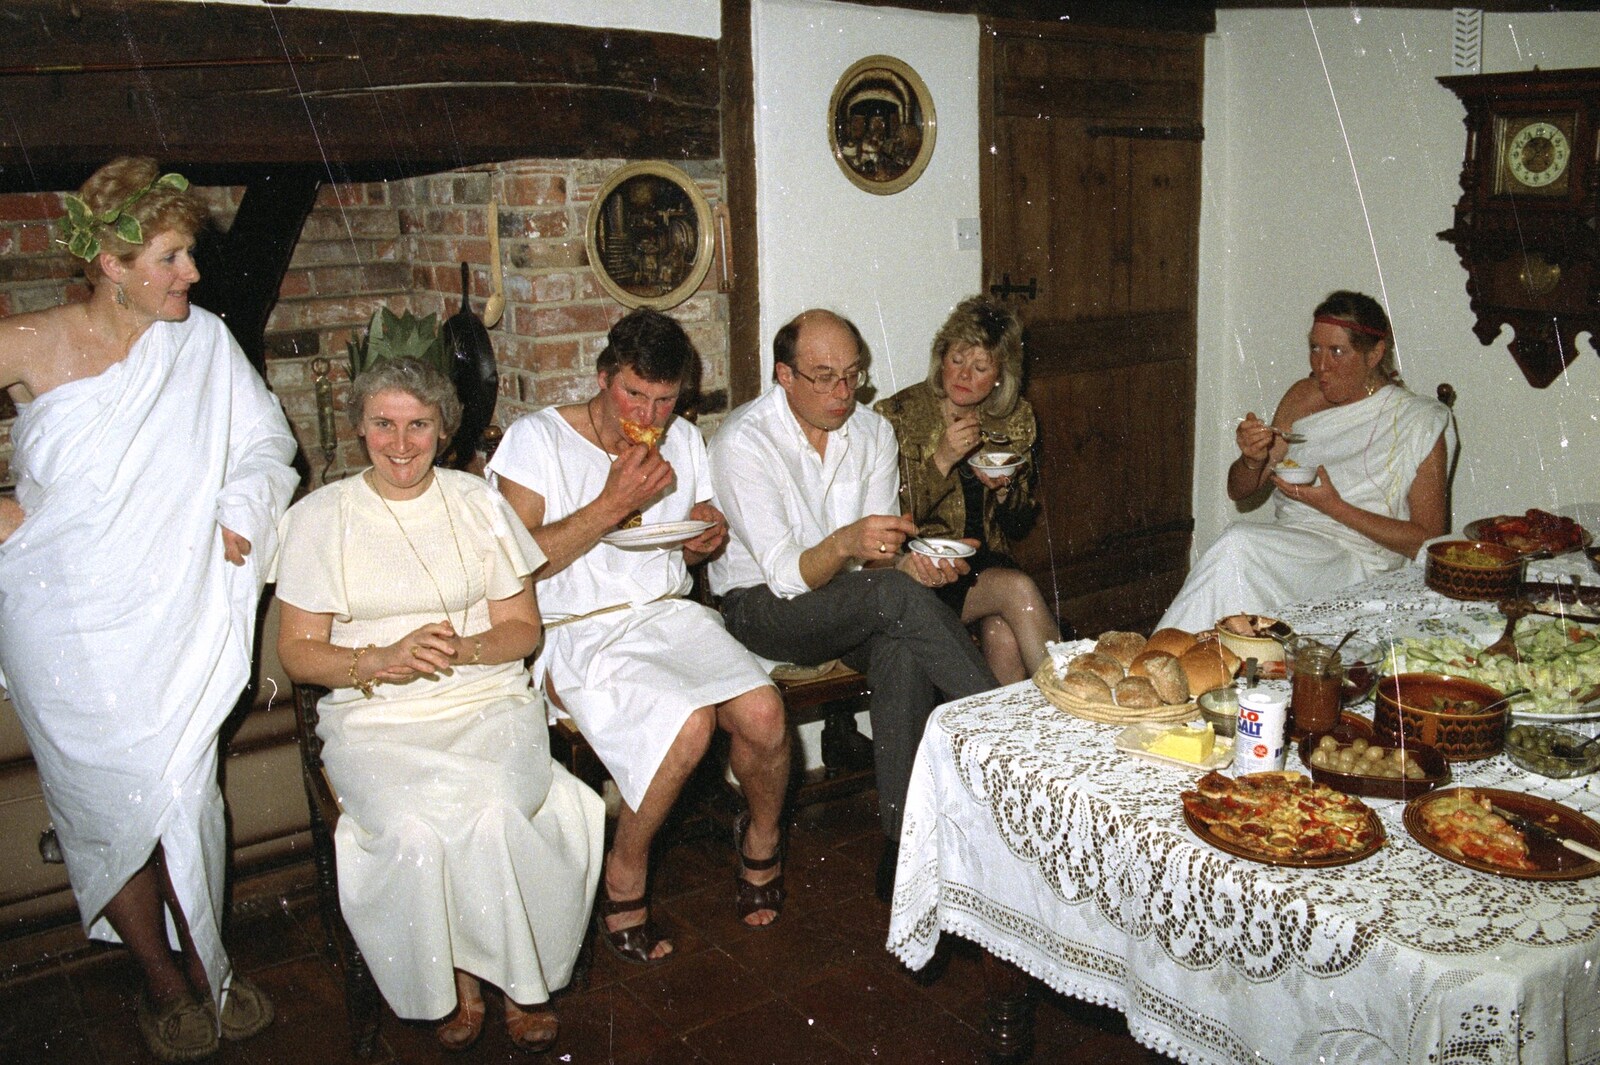 Linda smiles from Geoff and Brenda's Pre-Christmas Toga Party, Stuston, Suffolk - 17th December 1991